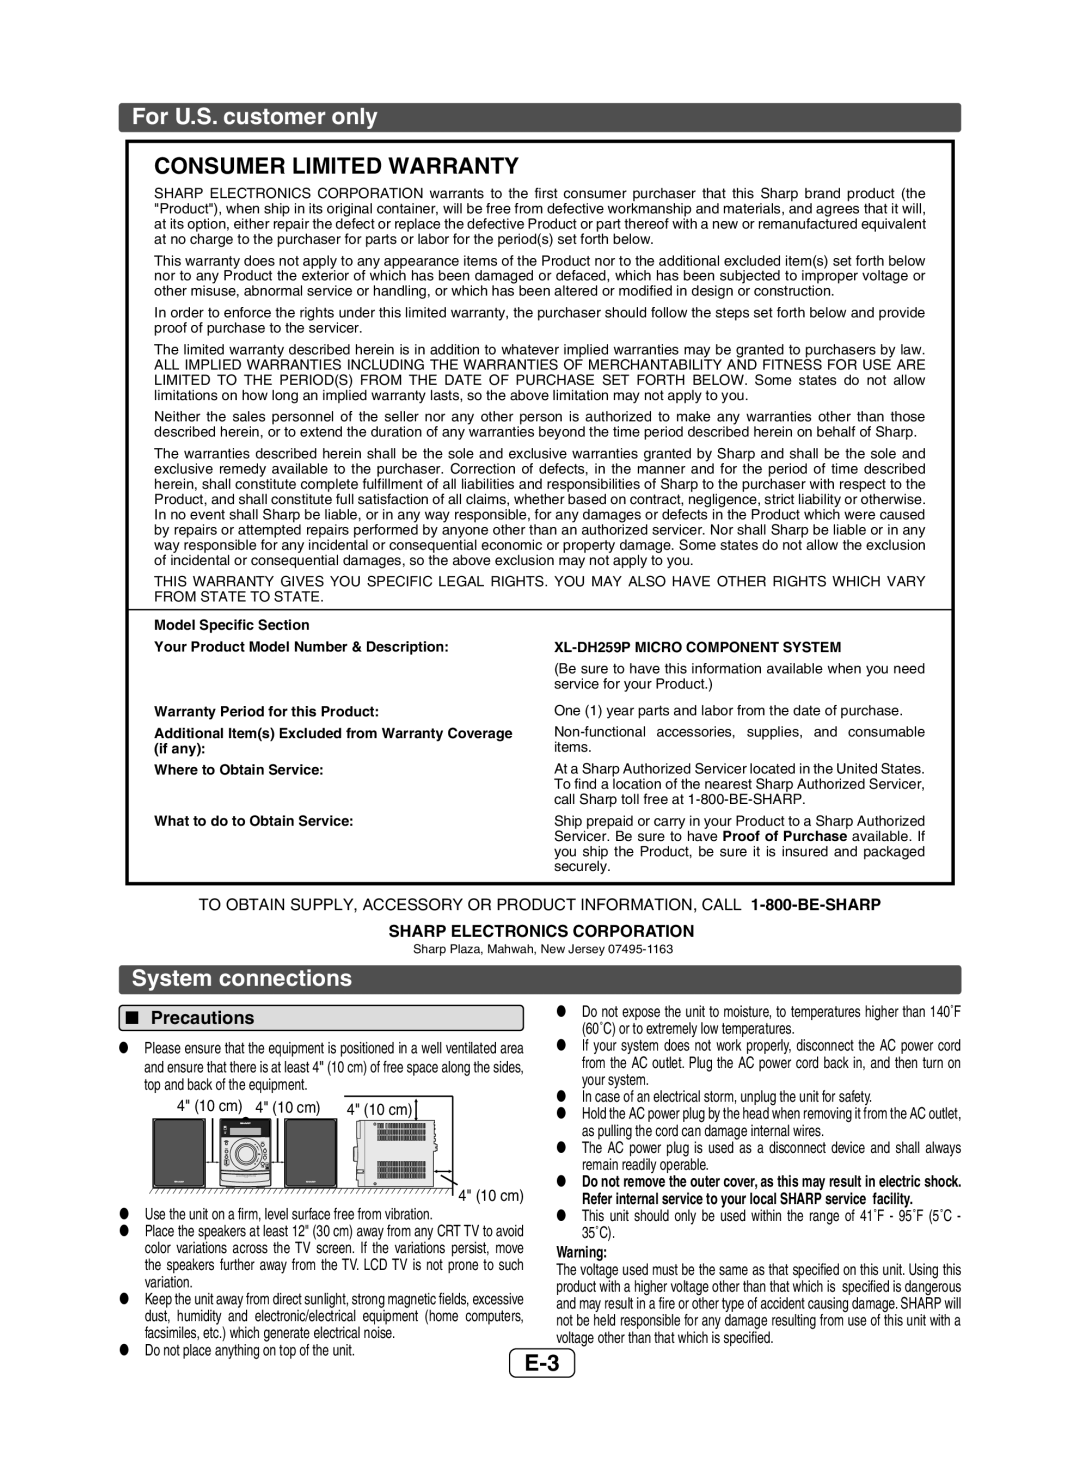 Sharp XLDH259P operation manual For U.S. customer only, Consumer Limited Warranty, System connections, Q Precautions 